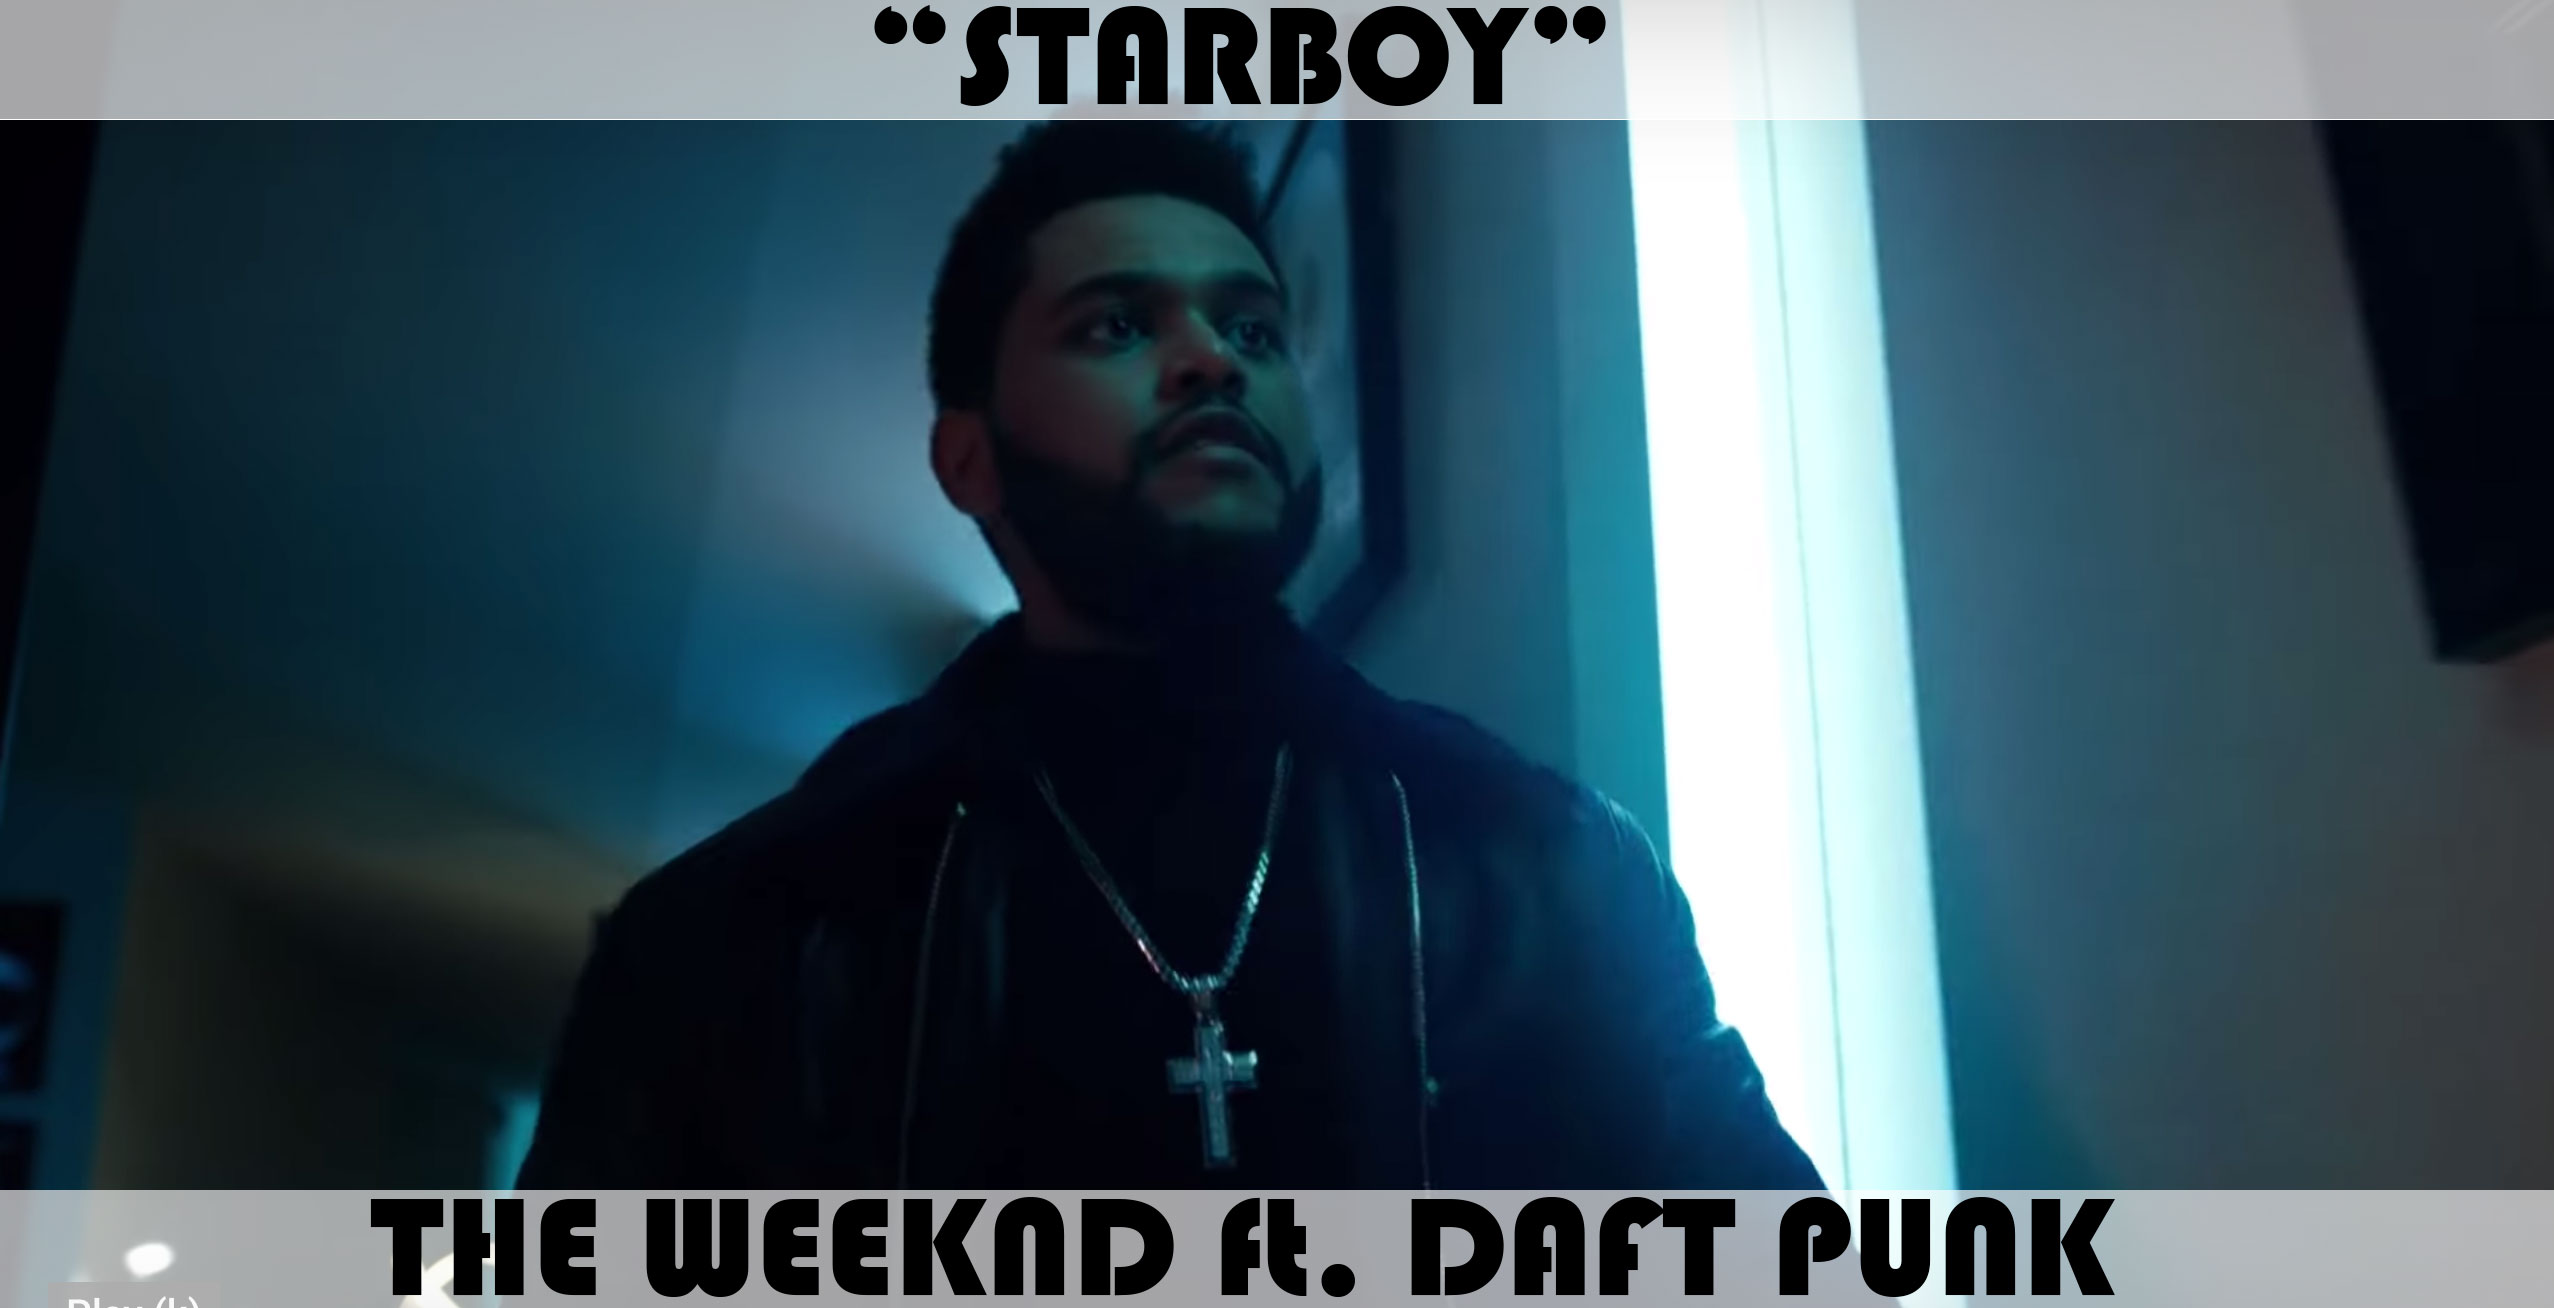 "Starboy" by The Weeknd